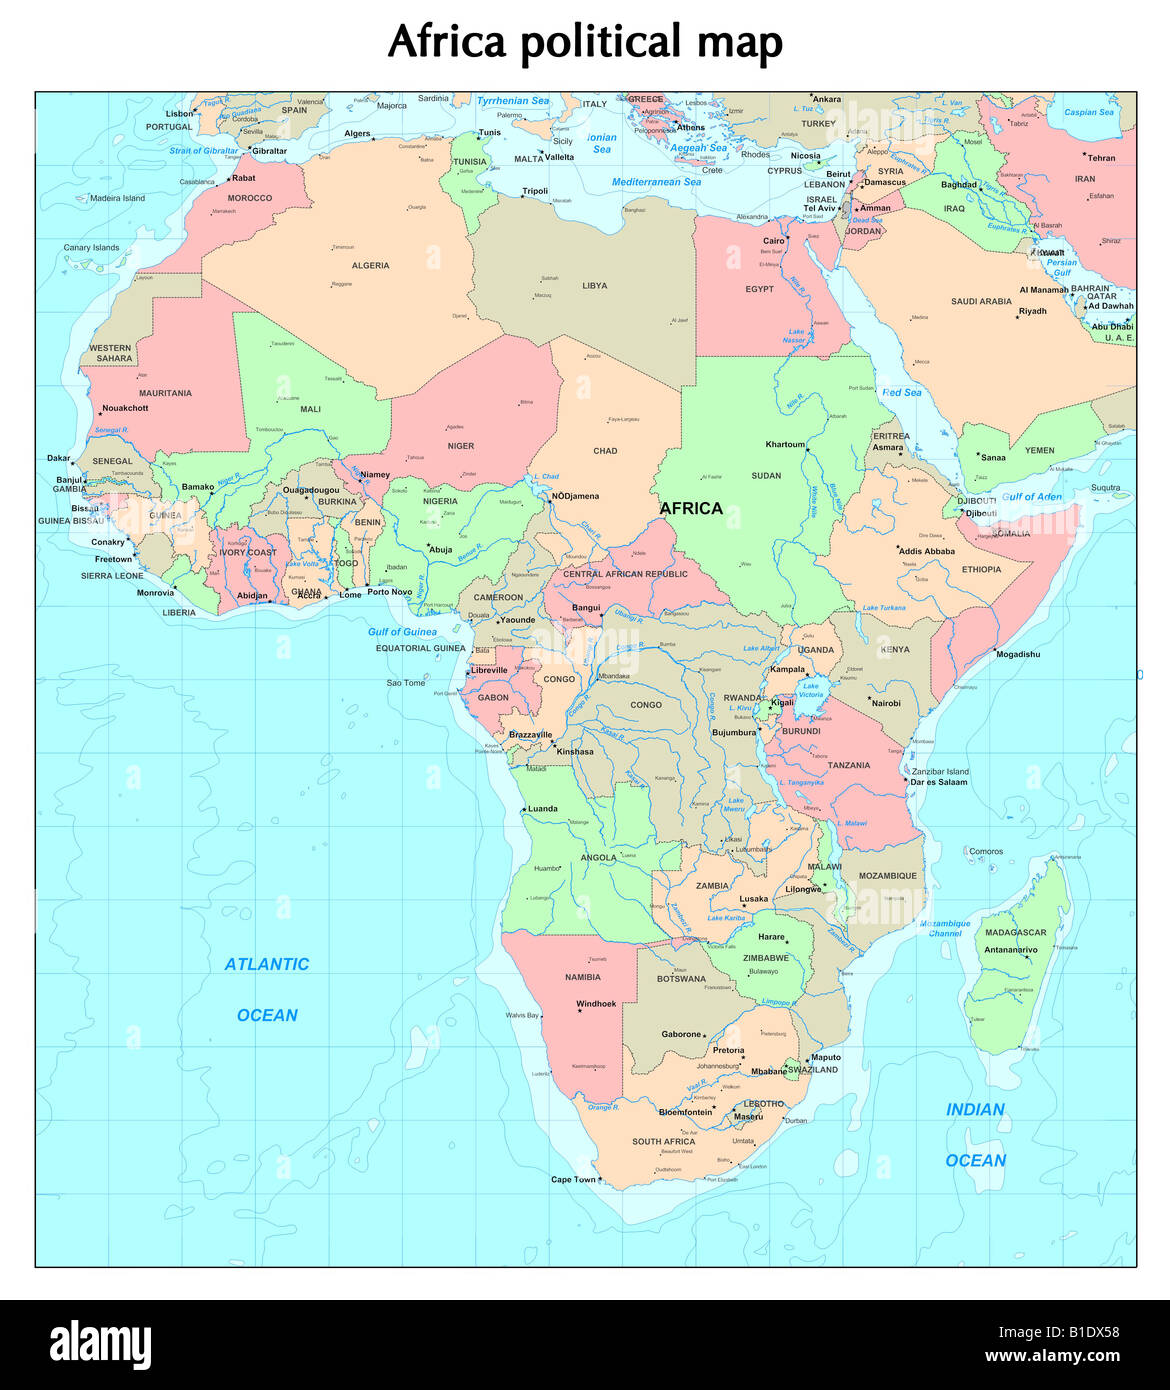 Africa political map Stock Photo